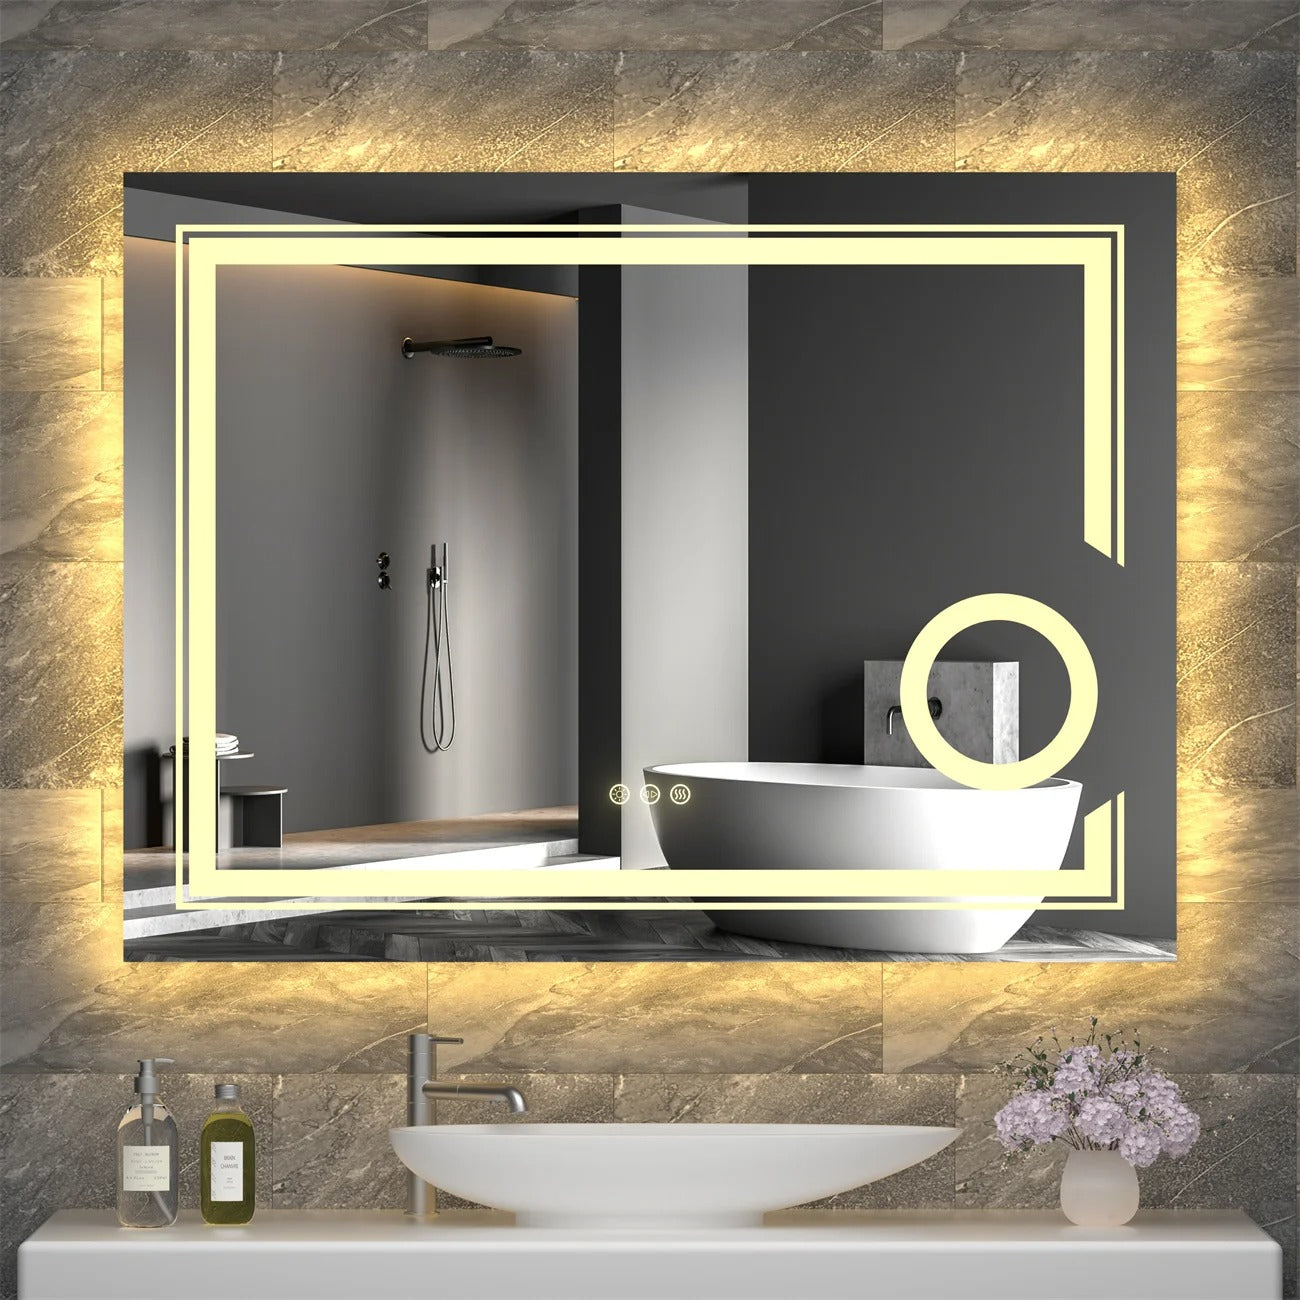 Rectangle Double lights Smart LED Smart Bathroom Mirror with 3X Magnifier